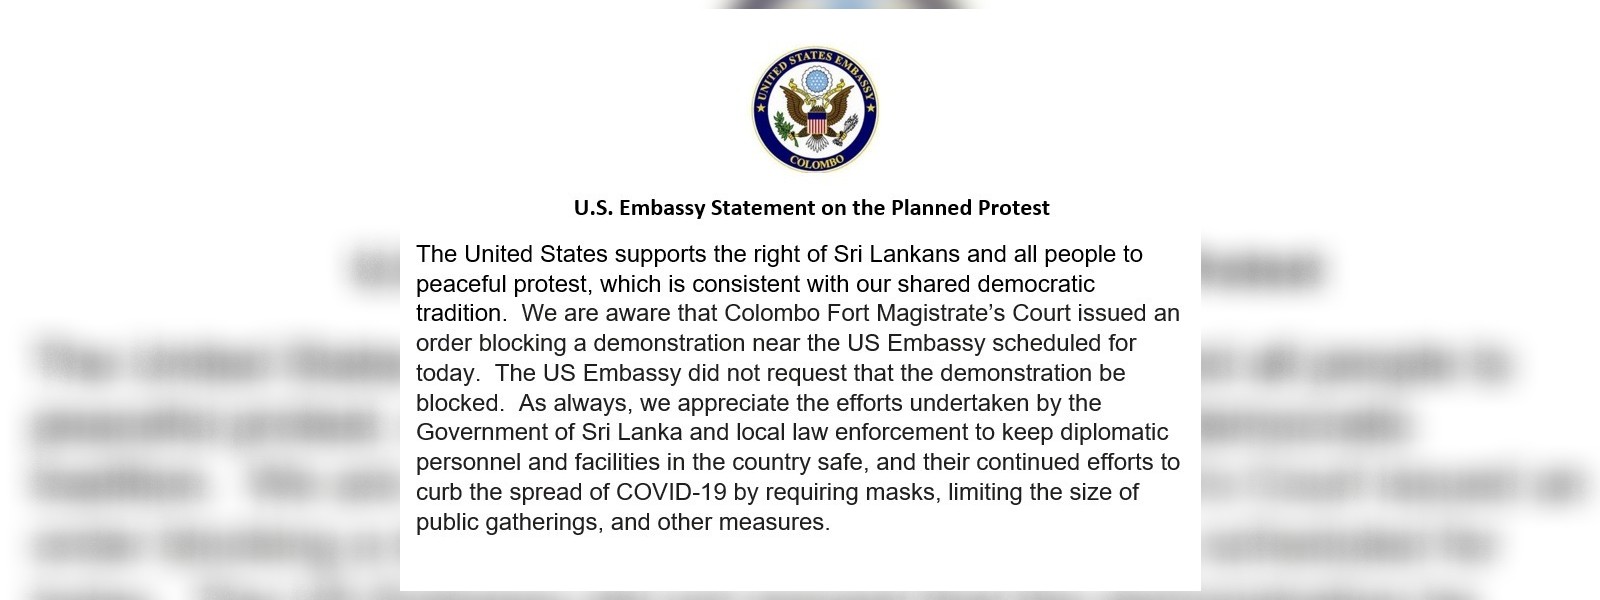 U.S. Embassy claims it did not request for the demonstration in Colombo to be blocked